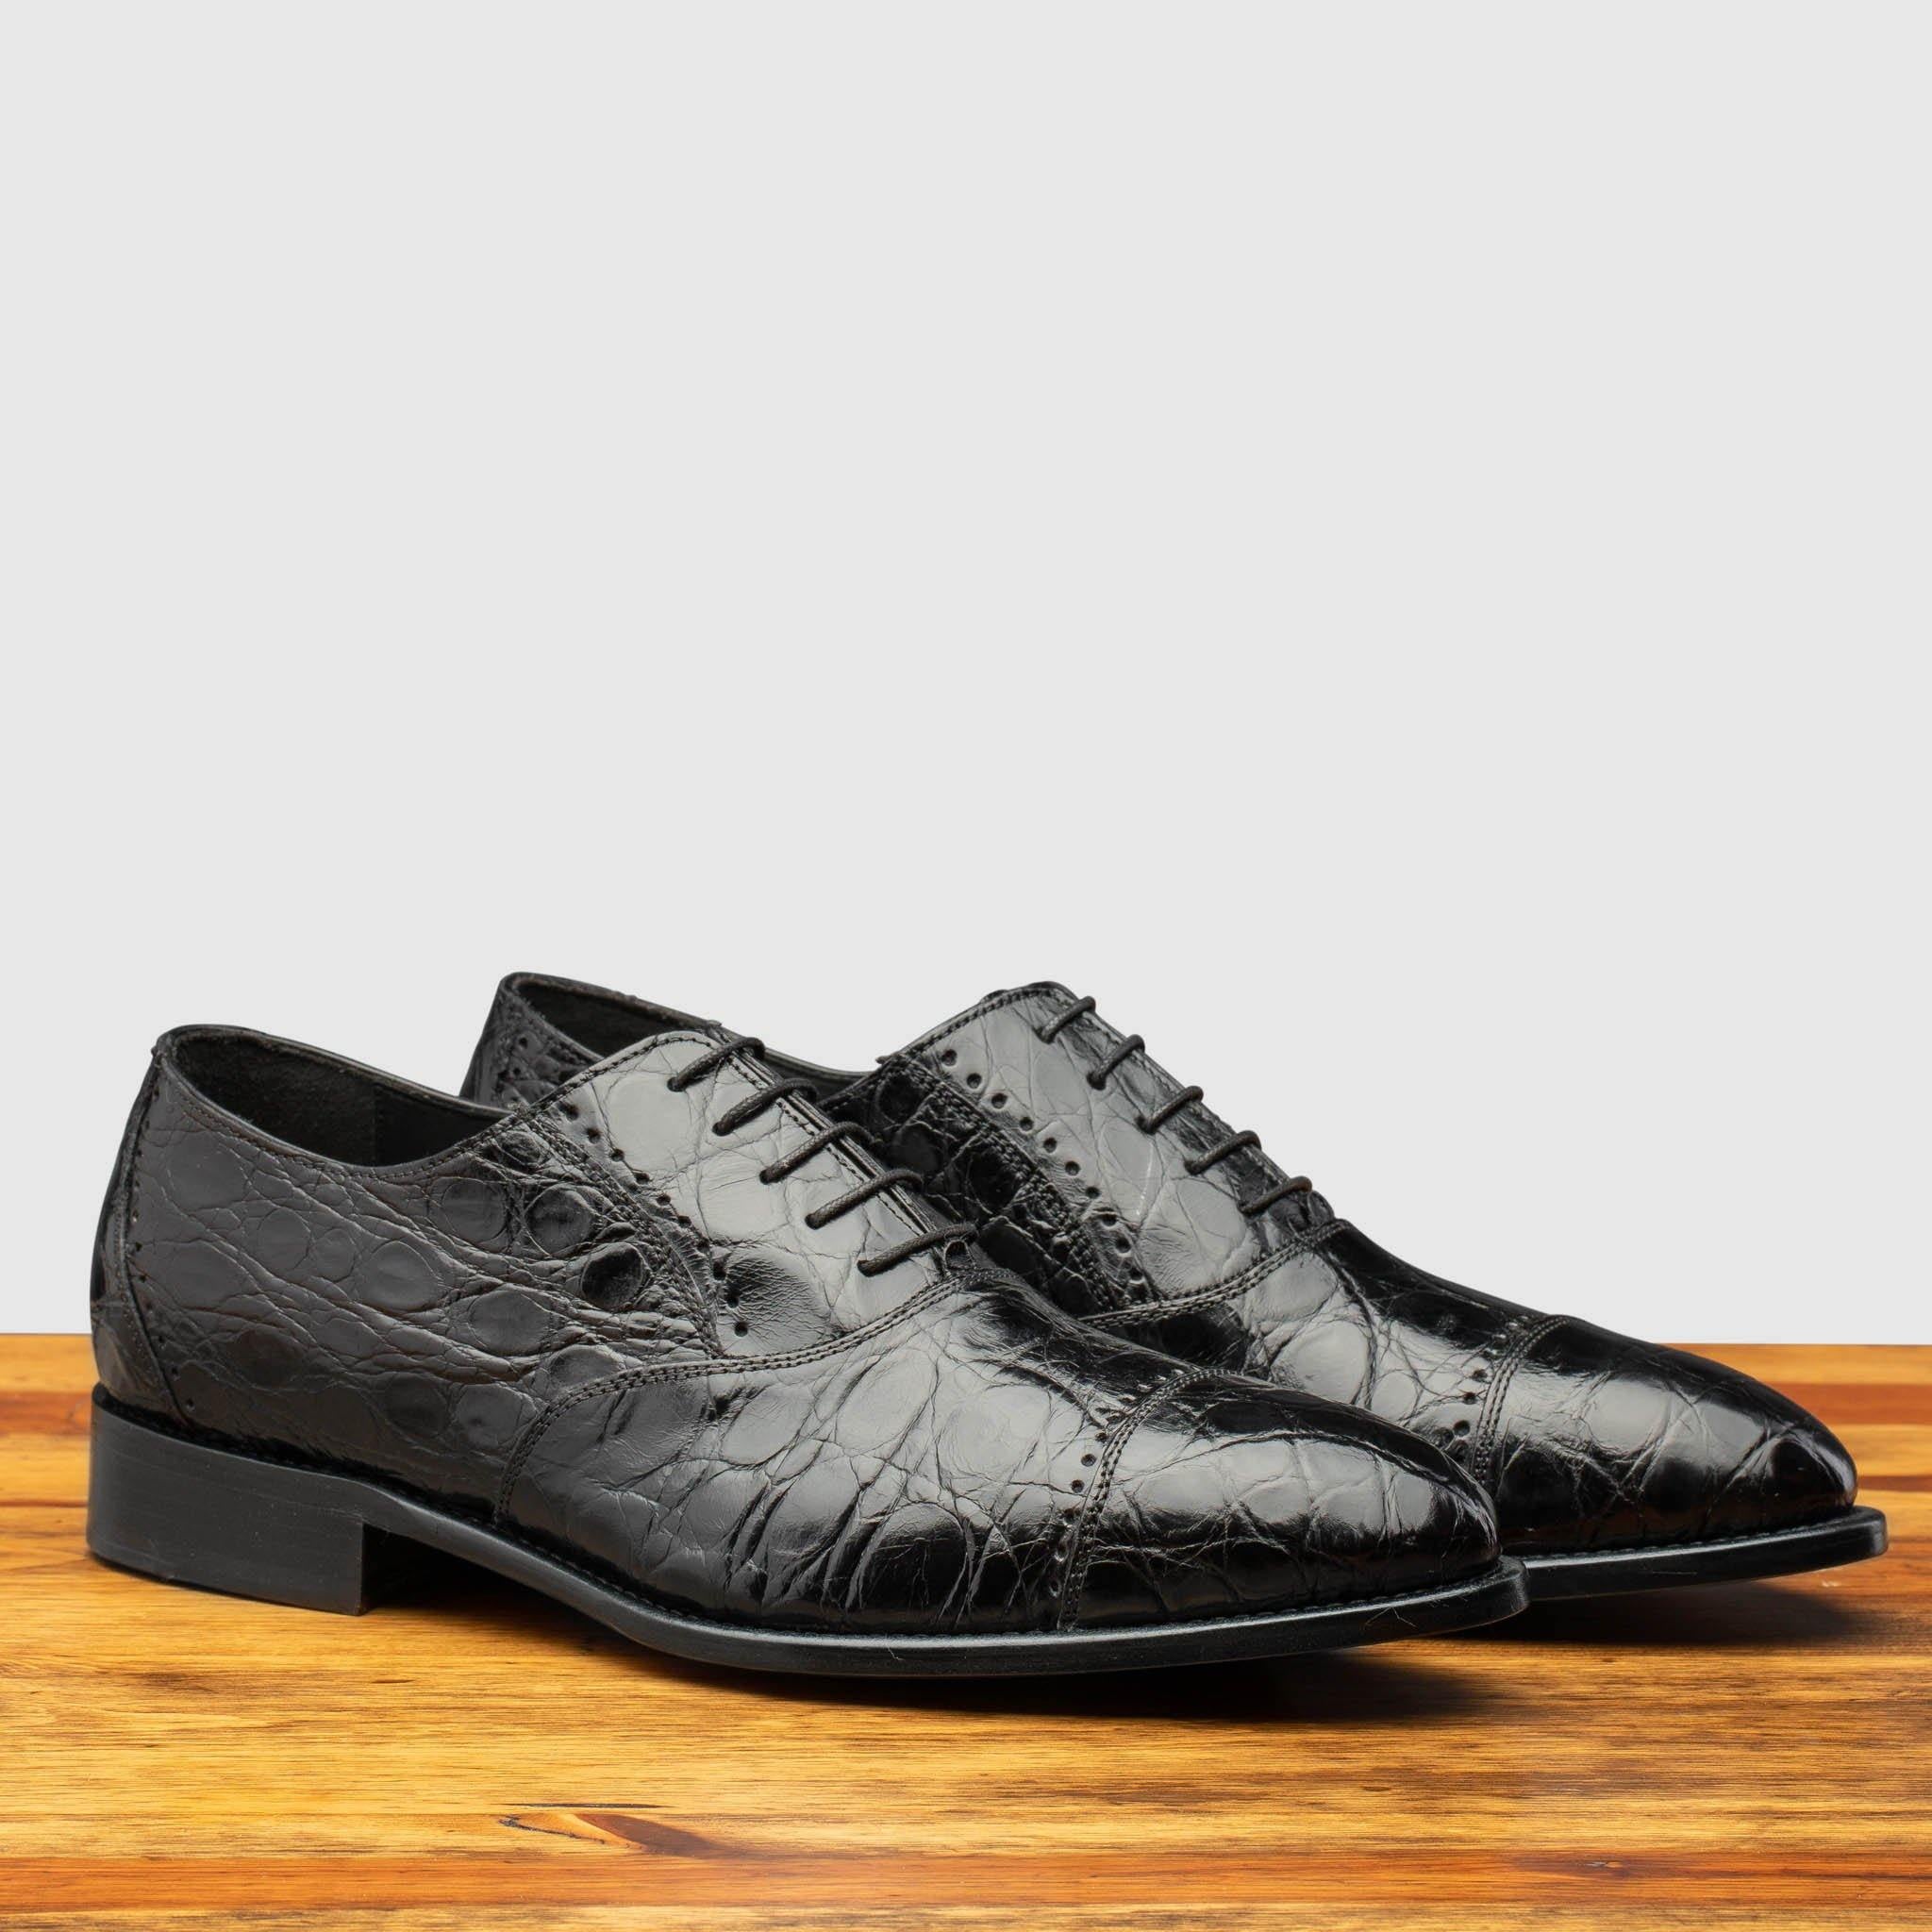 Pair of H779 Calzoleria Toscana Black  Silver Flanks Cap Toe on top of a wooden table